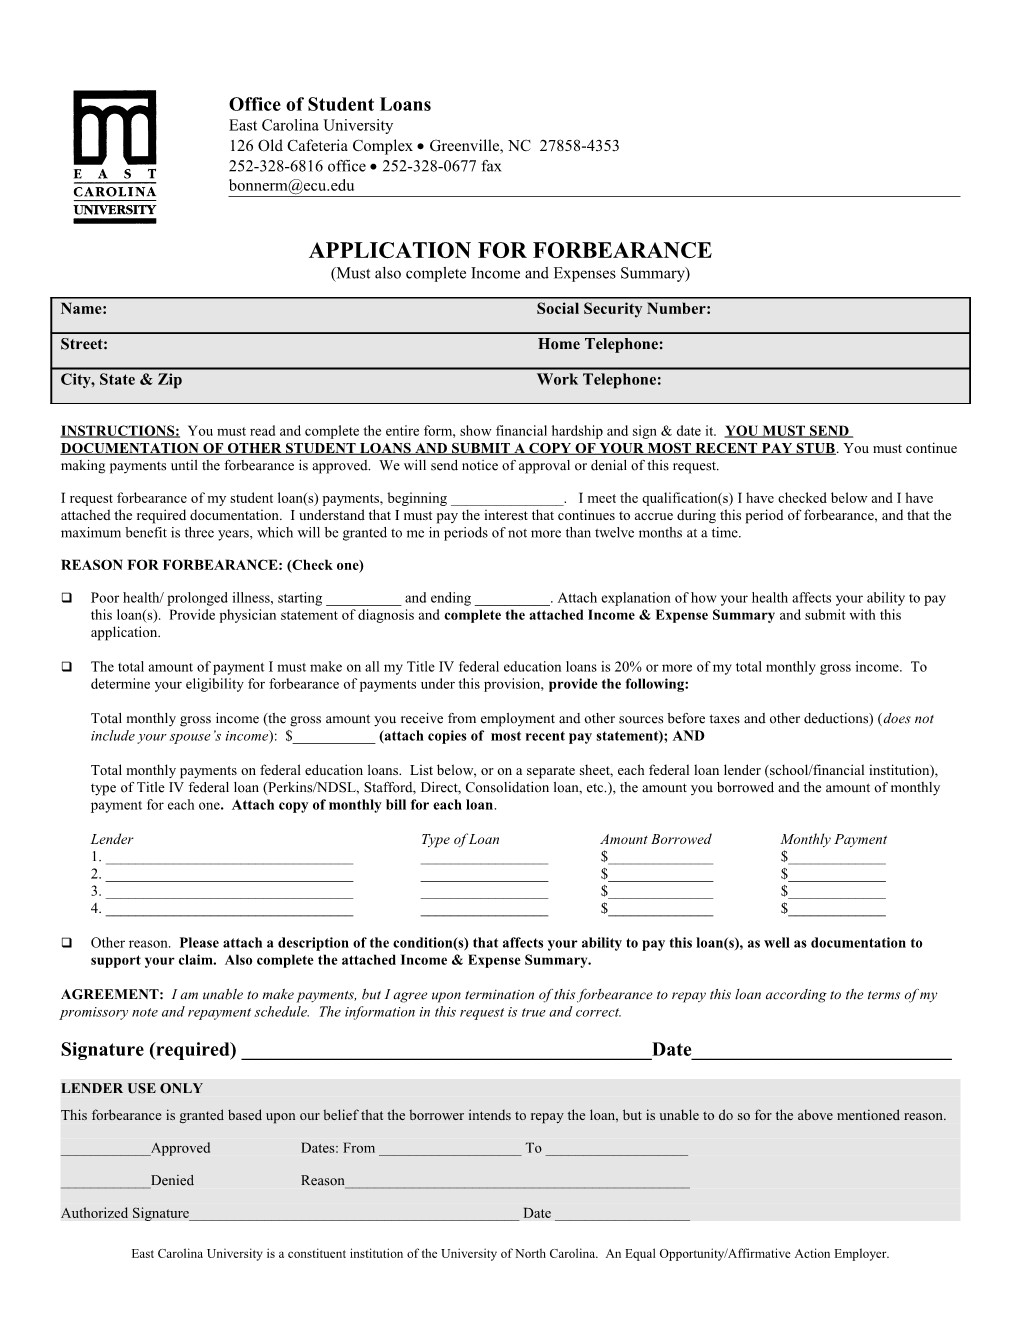 Application for Forbearance